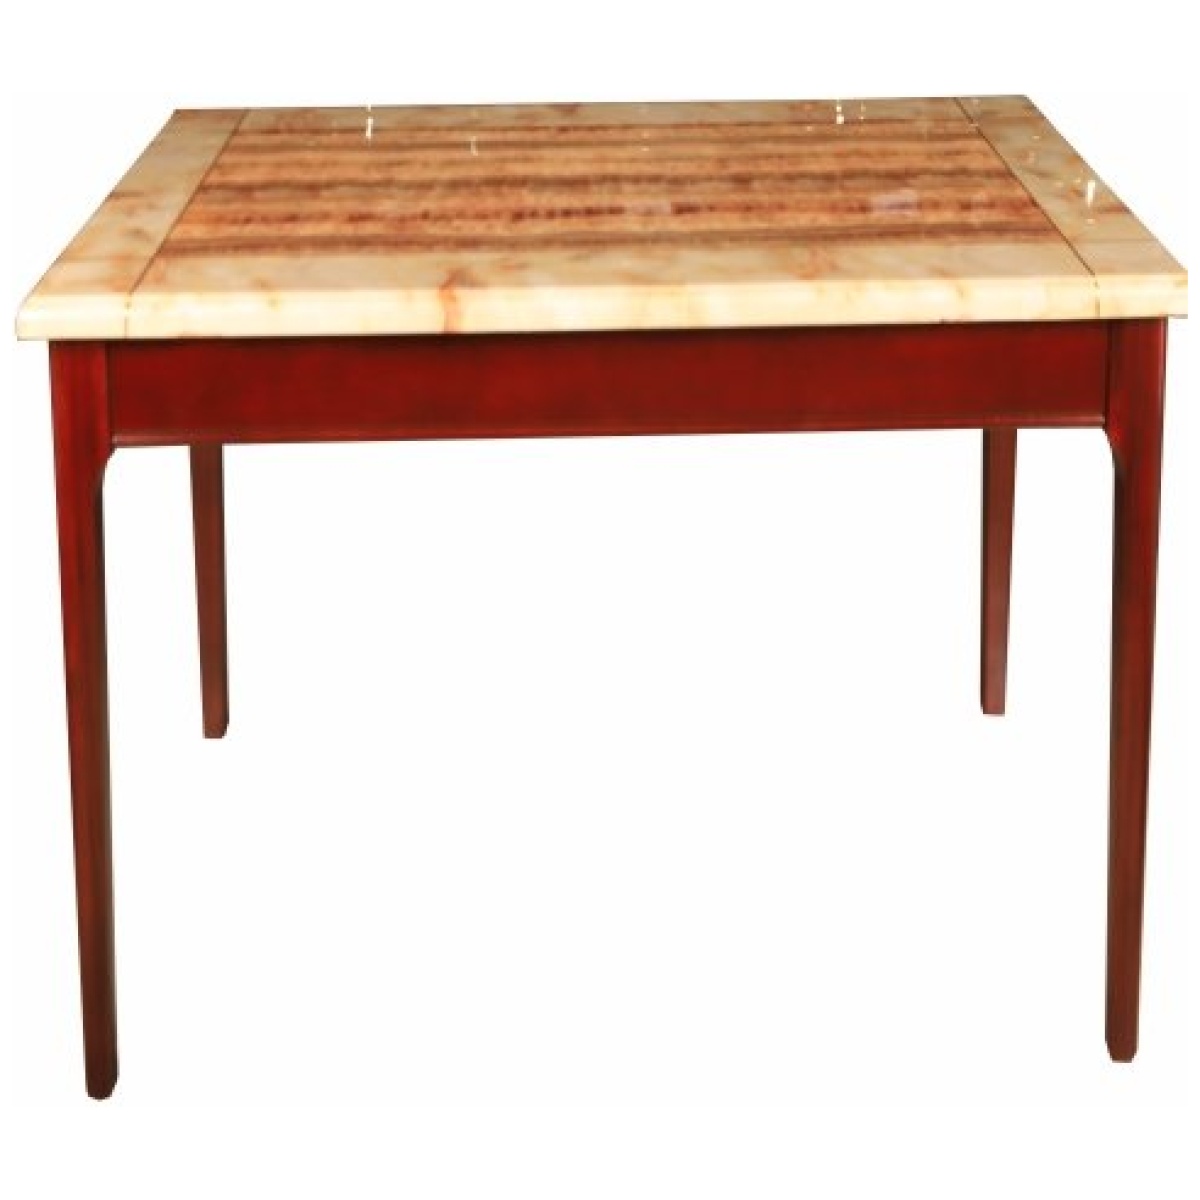 Mable Top Dinning Table (BF149)